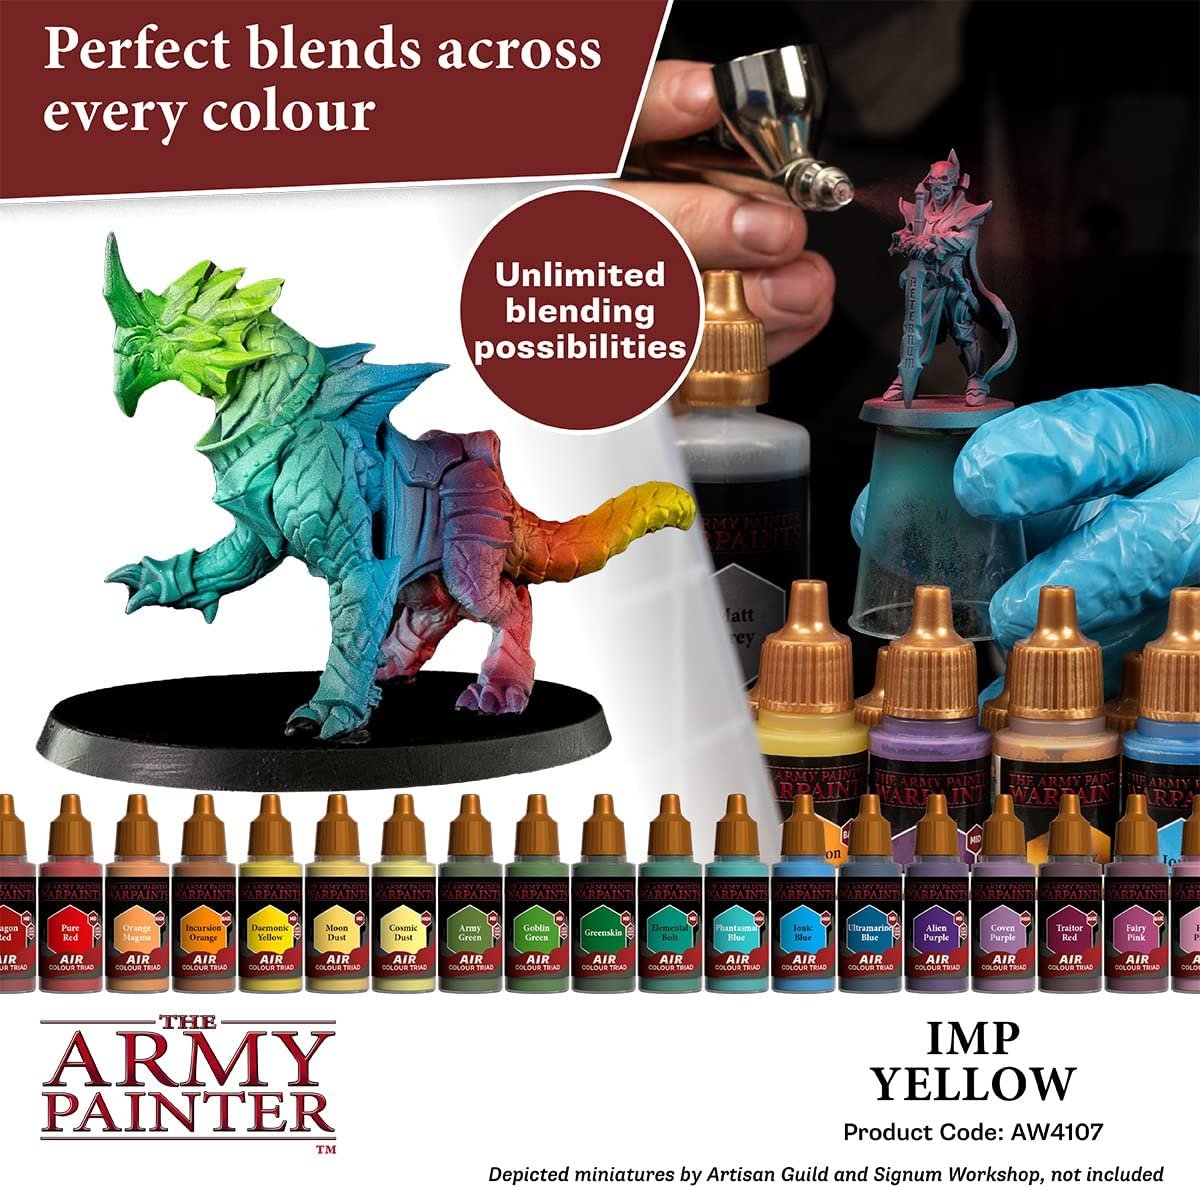 The Army Painter - Warpaints Air: Imp Yellow (18ml/0.6oz)